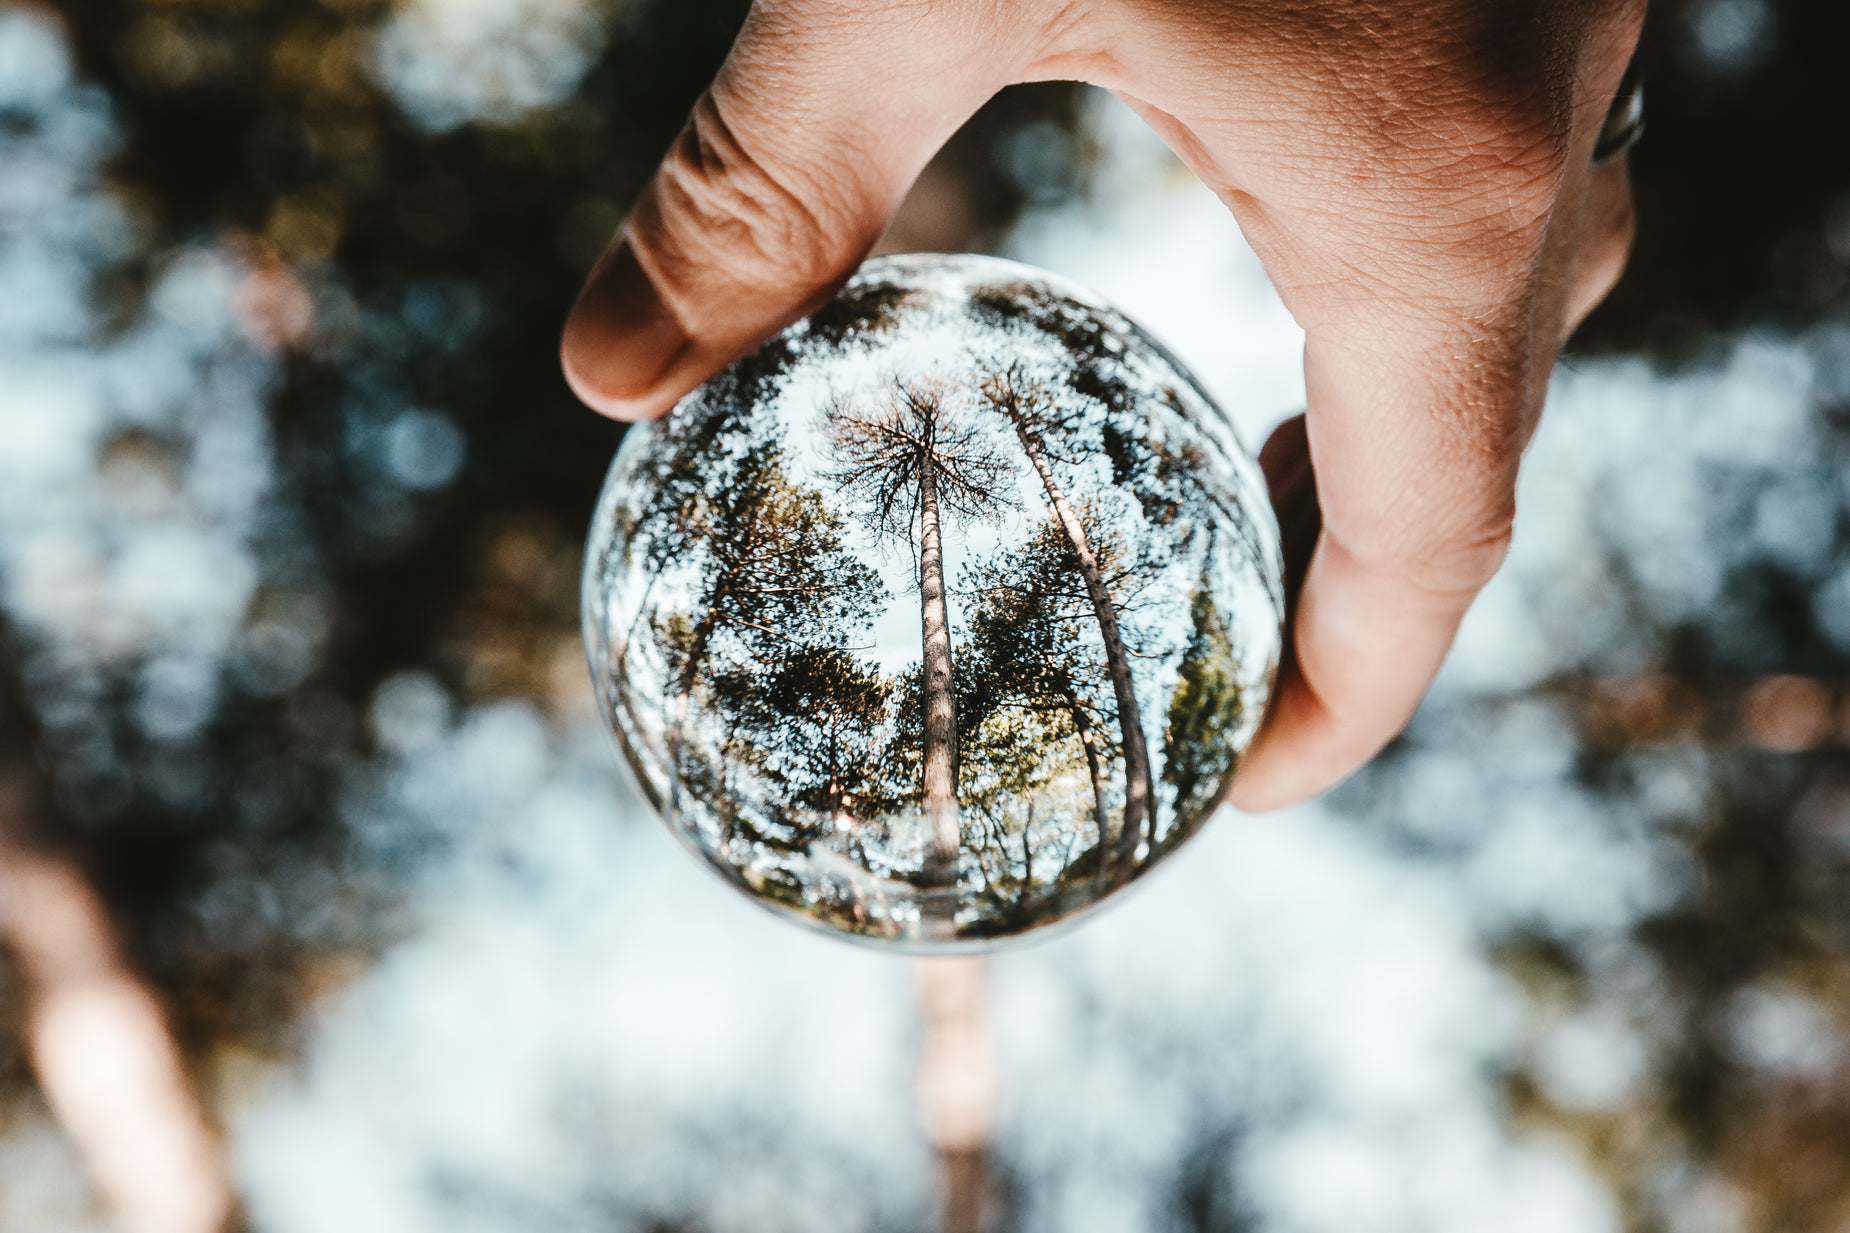 a person holding up a snow covered plastic ball